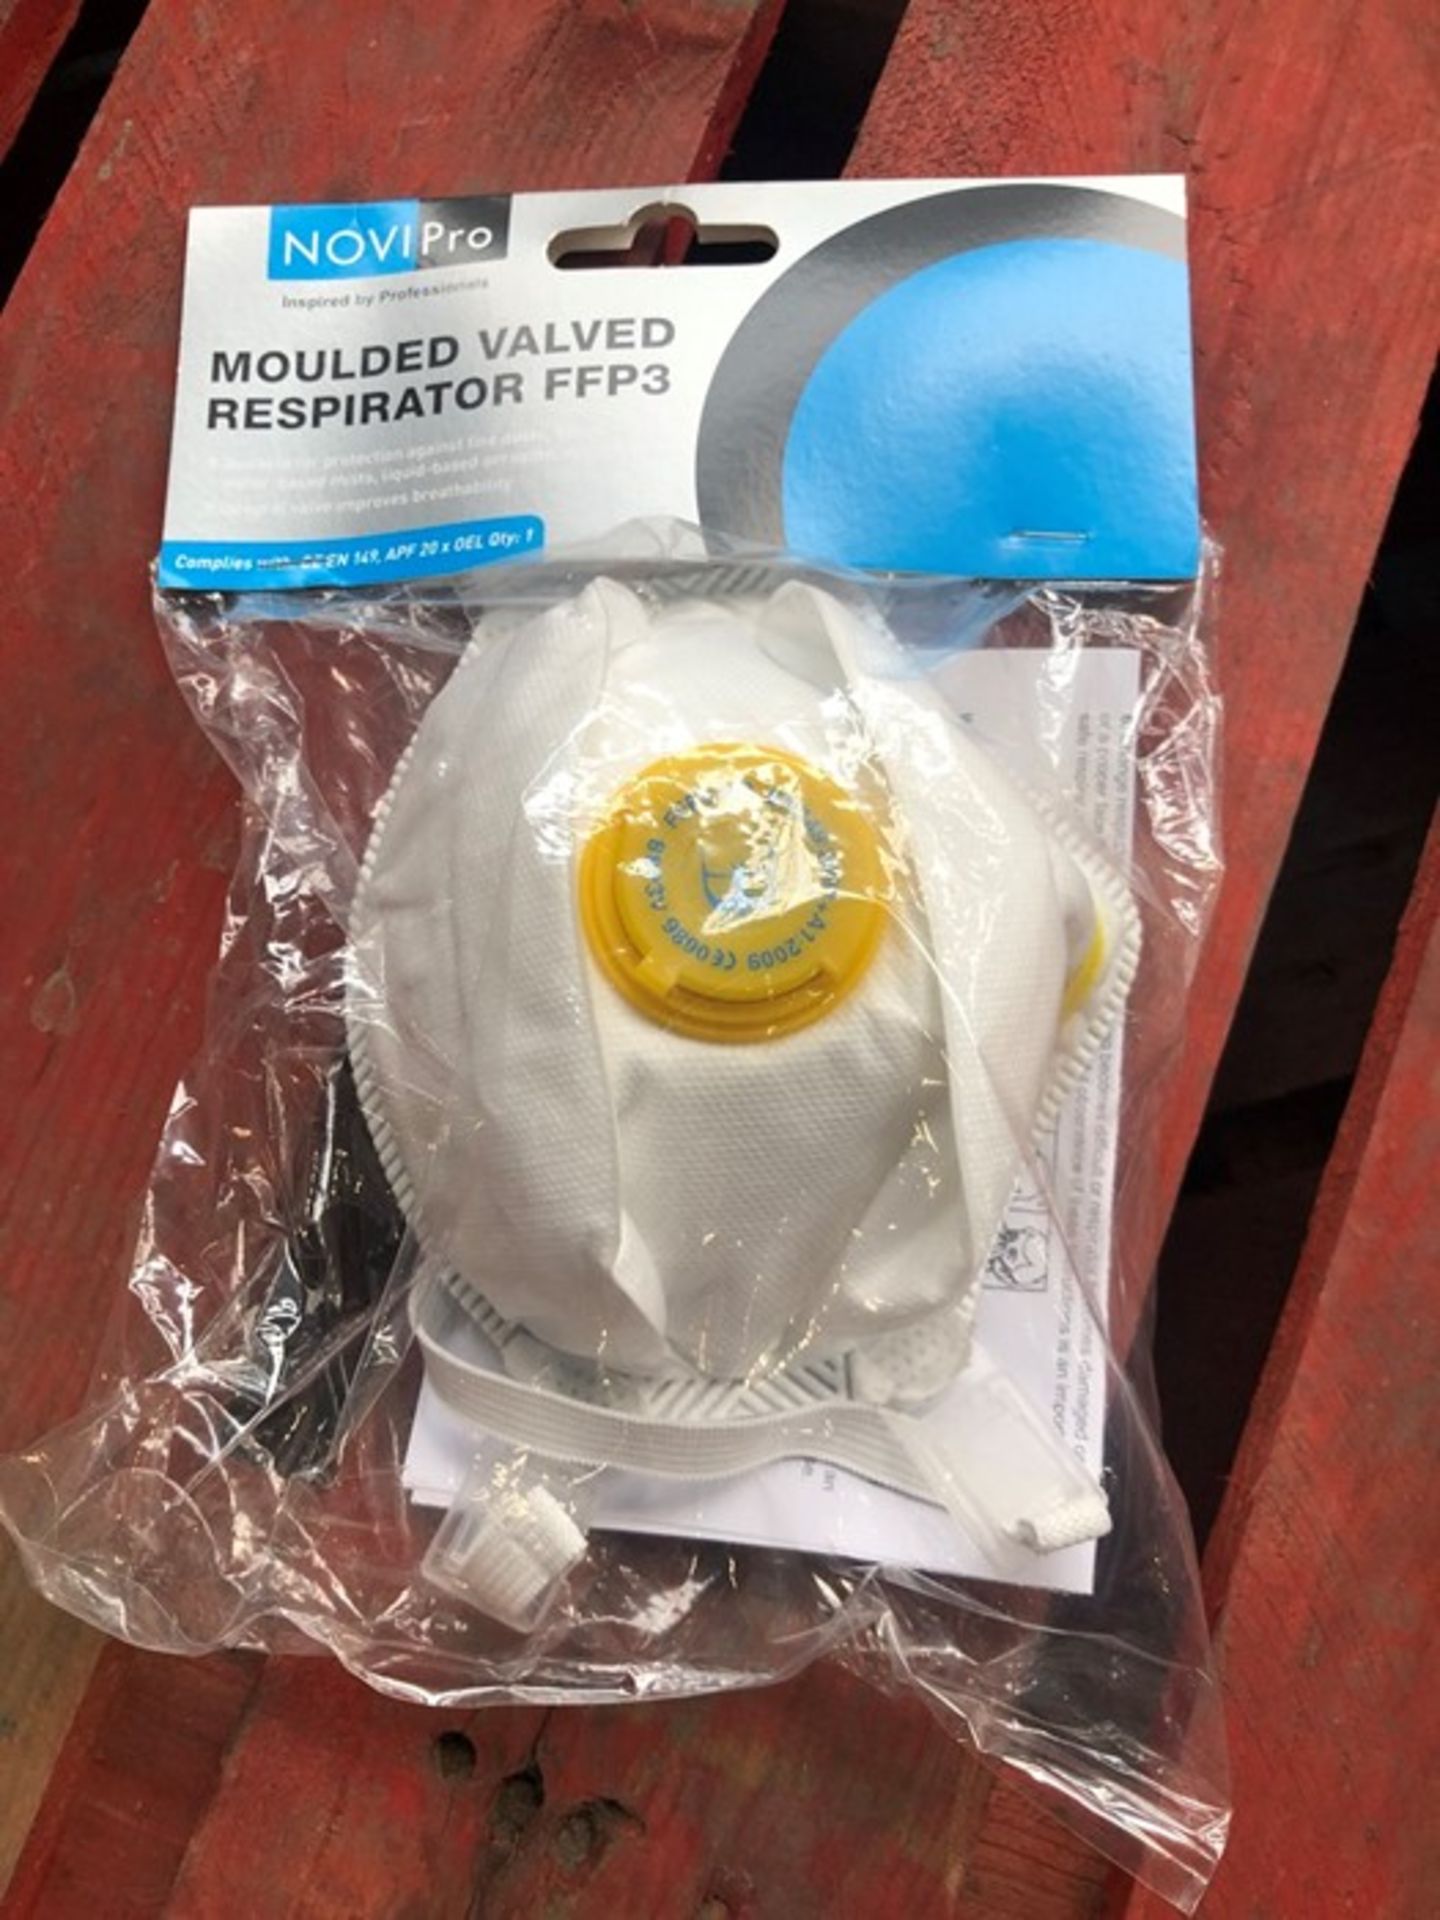 1 BAGGED NOVIPRO MOULDED VALVED RESPIRATOR FFP3 / RRP £27.24 / PN - 626 (PUBLIC VIEWING AVAILABLE)